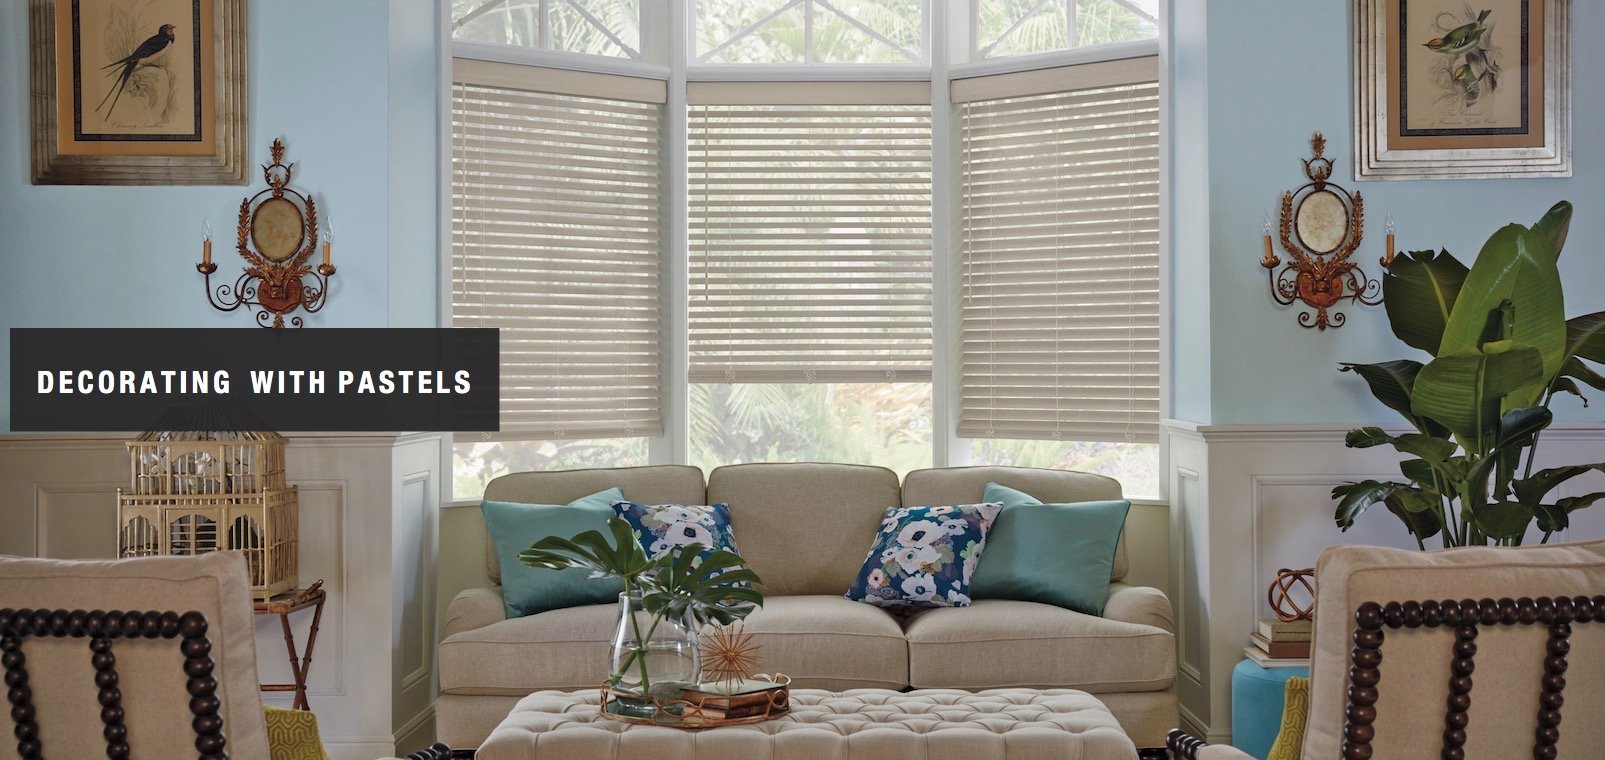 Compatible Window Treatments With Pastel Home Decor